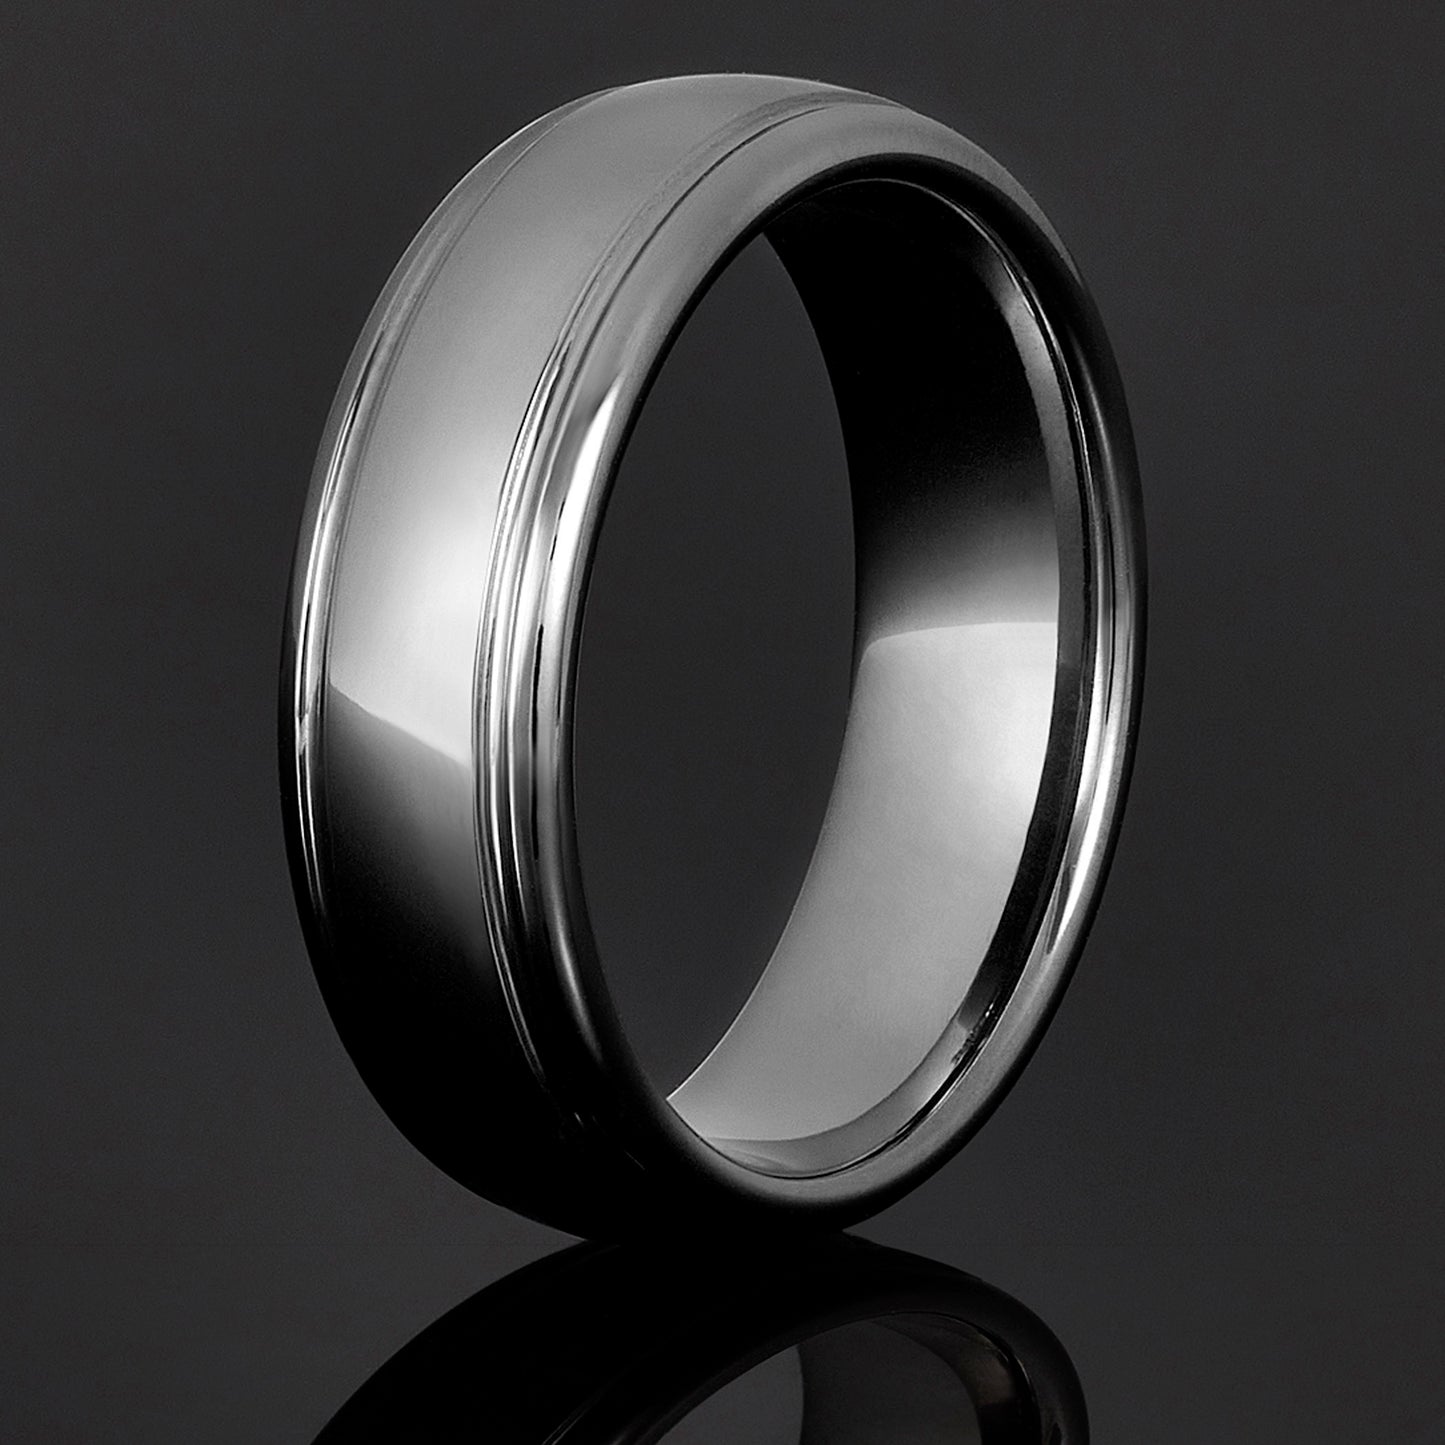 Polished Grooved Tungsten Carbide Wedding Band Ring (7mm Wide)